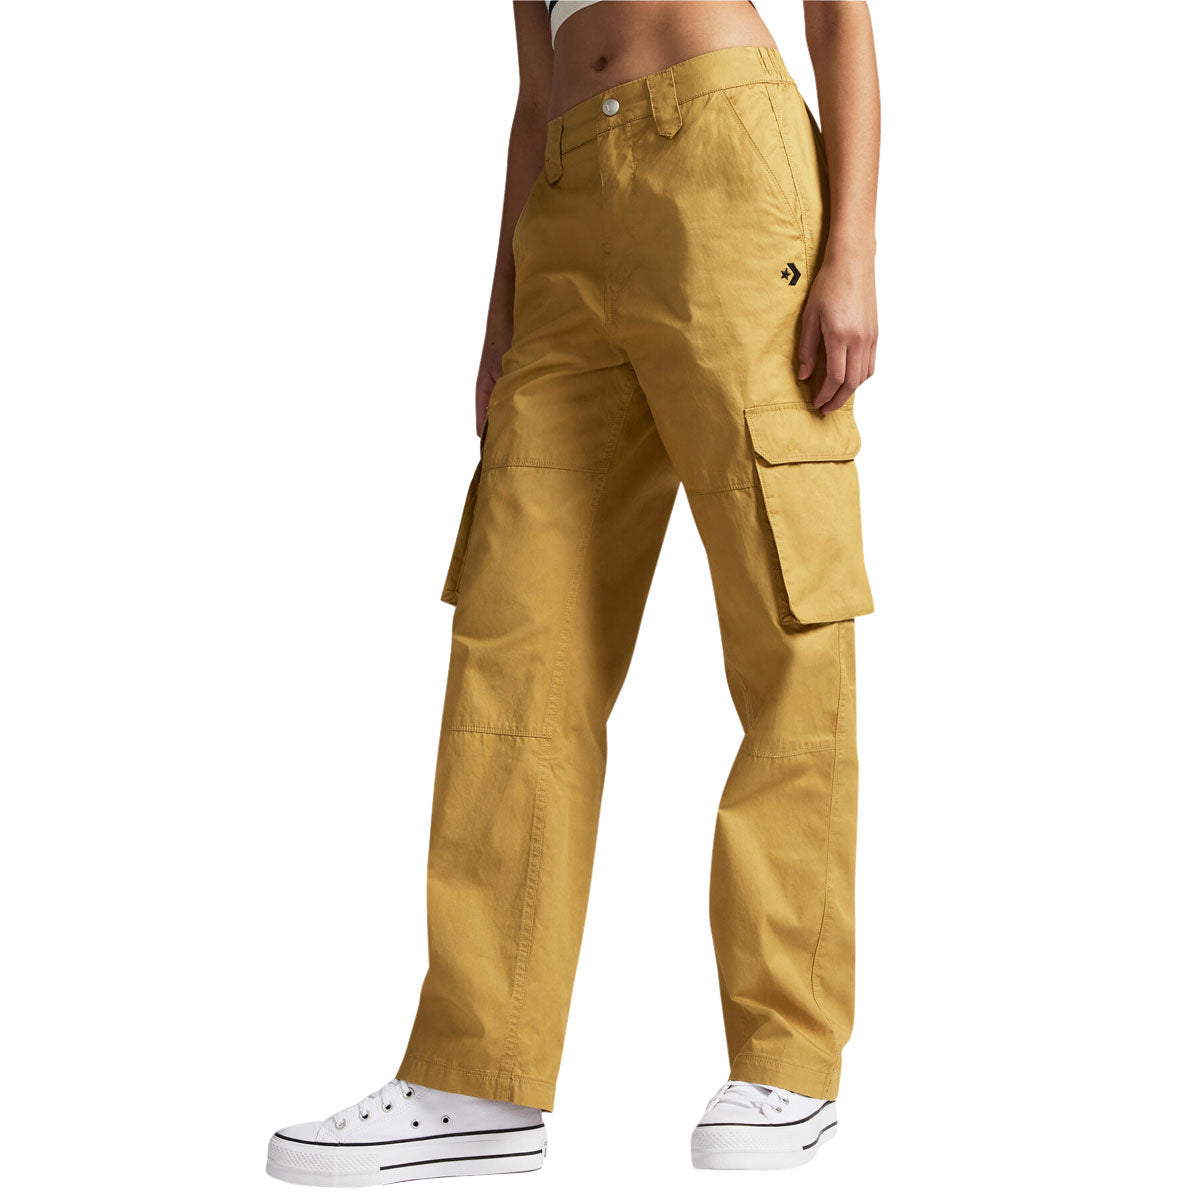 Converse Relaxed Cargo Pants - Dunescape image 1